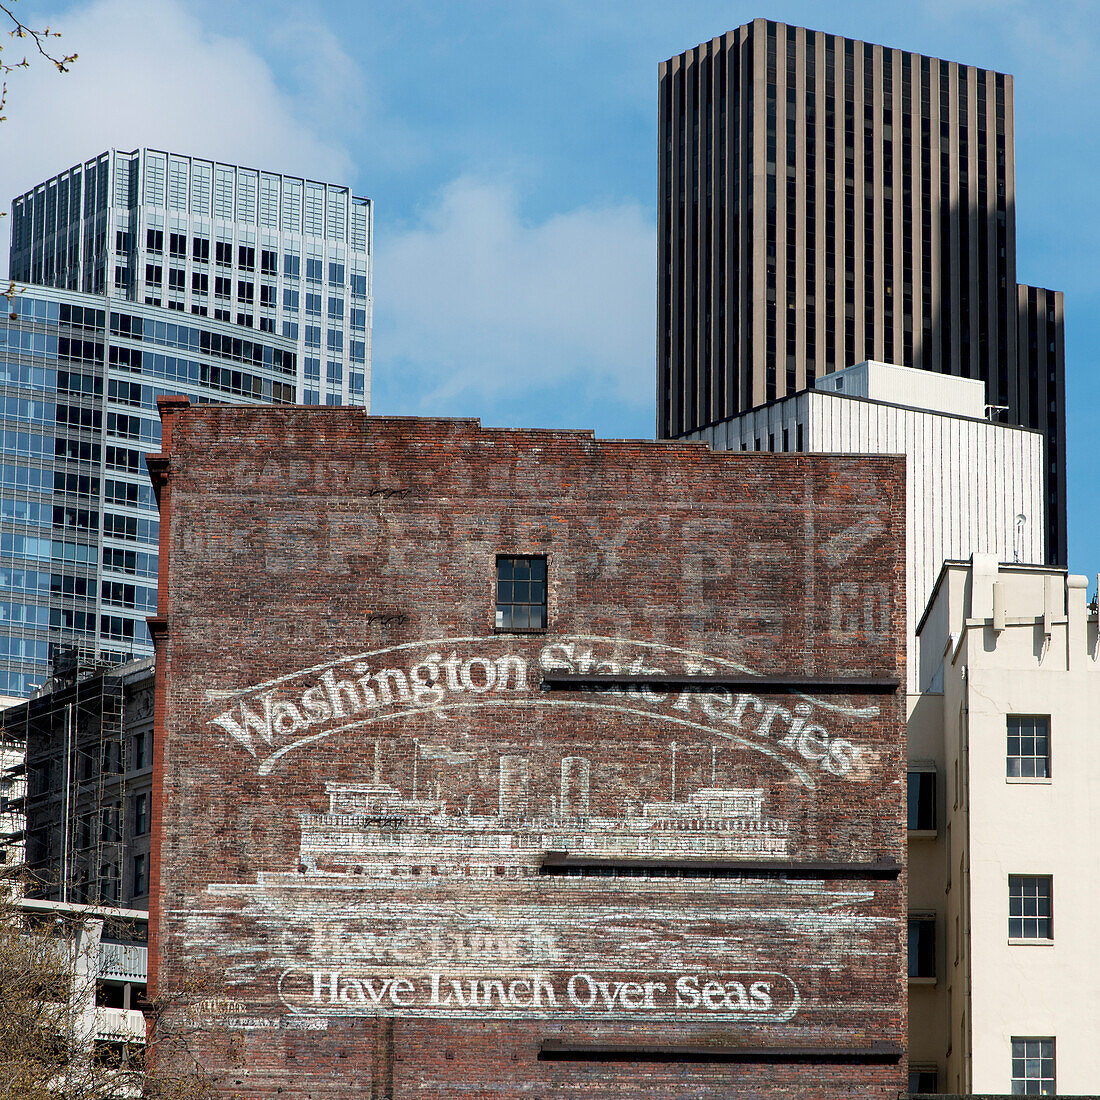 Contrast Of Old And Modern Buildings With A Painted Advertisement For Washington State Ferries; Seattle, Washington, United States Of America